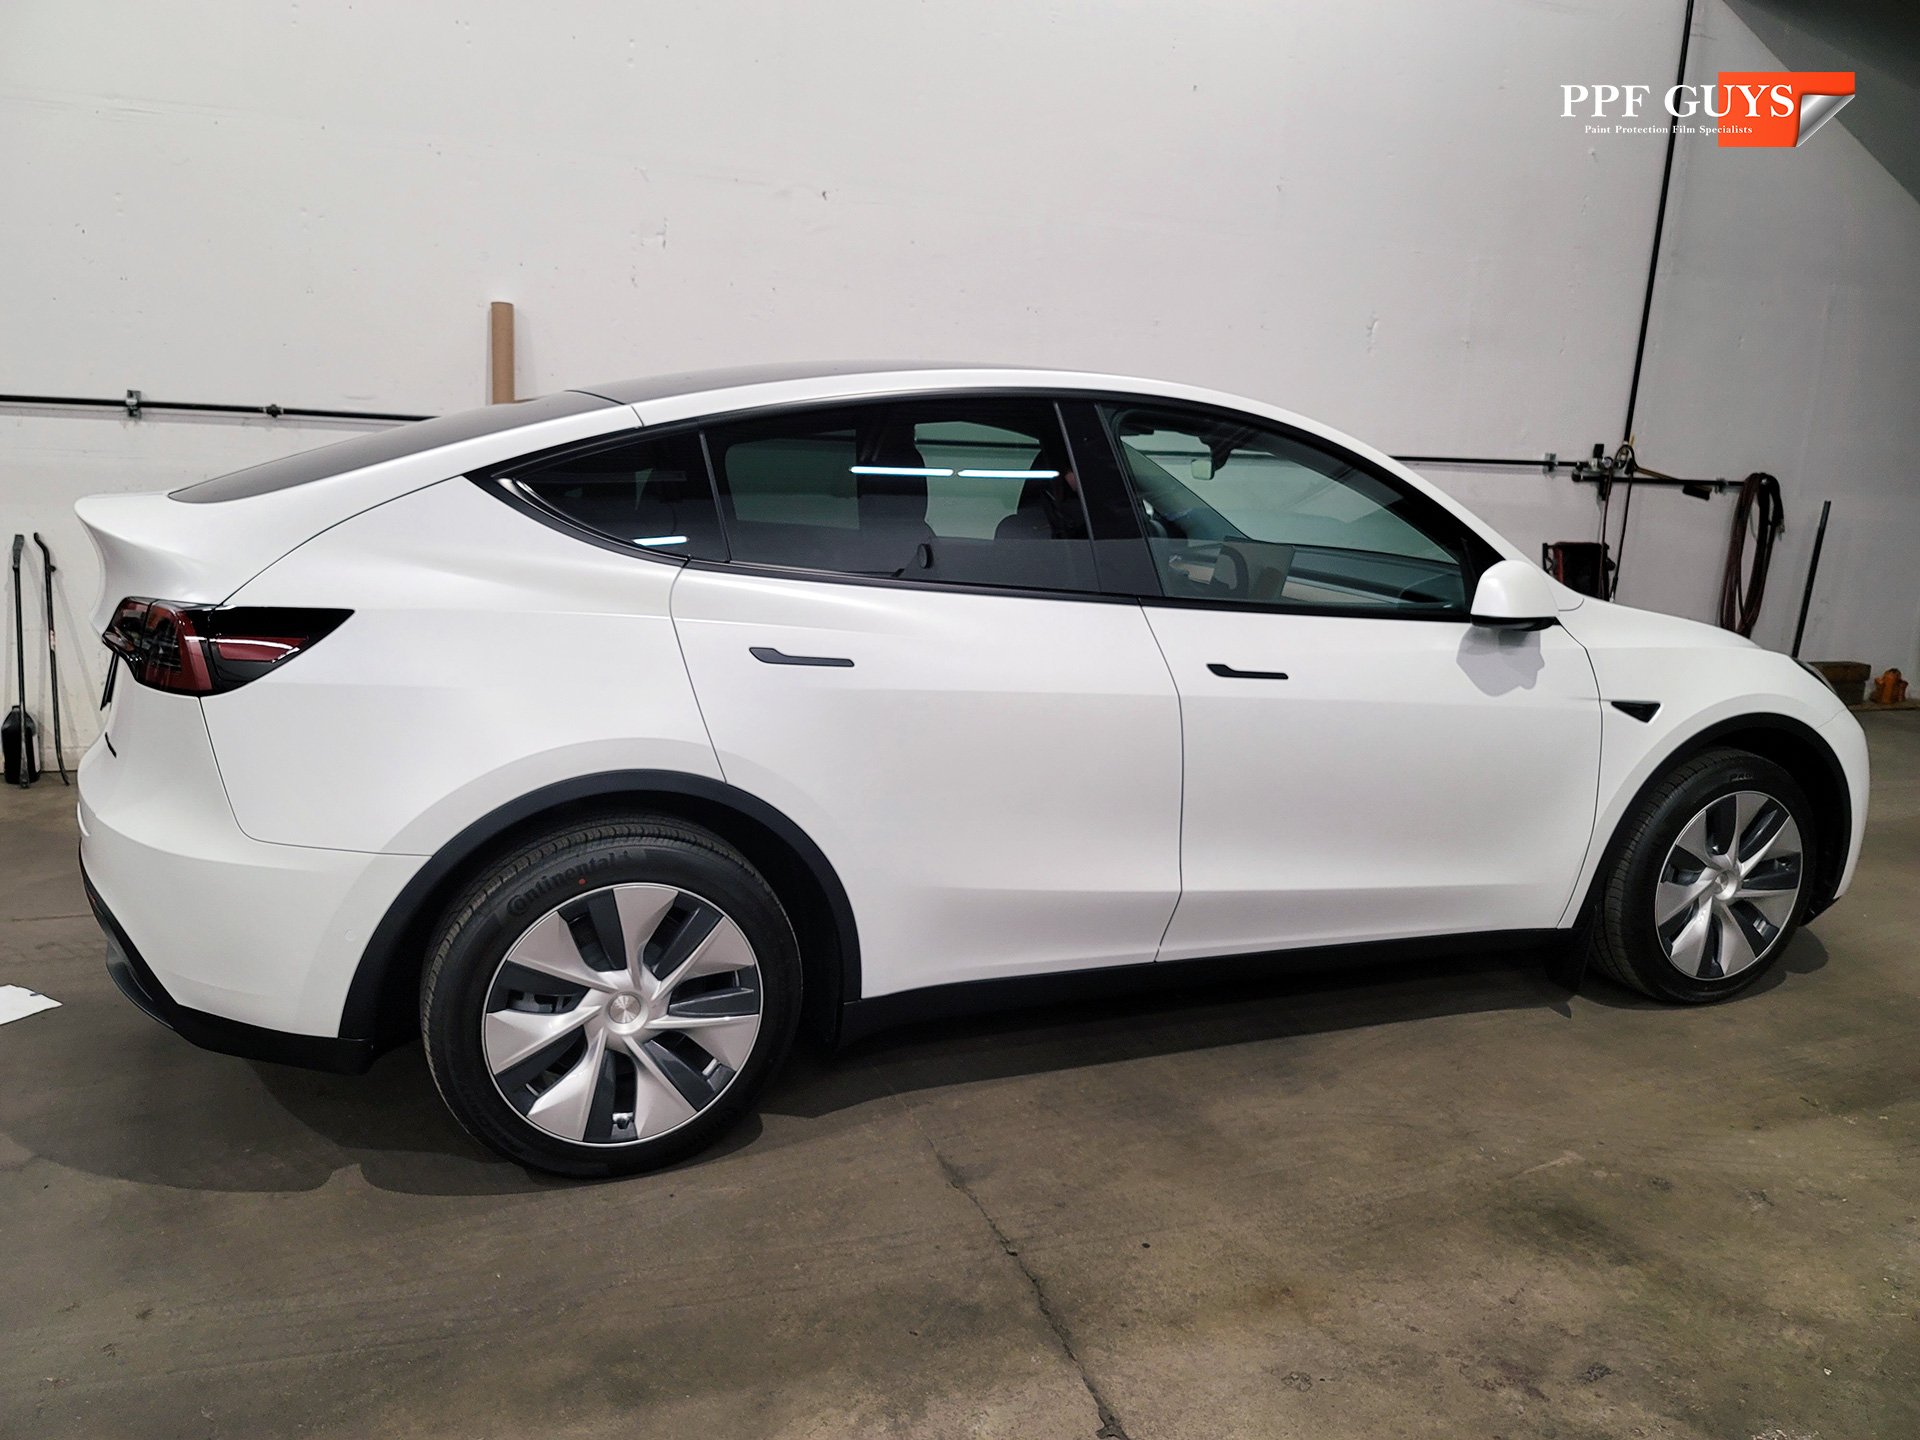 PPF Guys Model Y White Xpel Stealth, ceramic, painted emblems (32).jpg